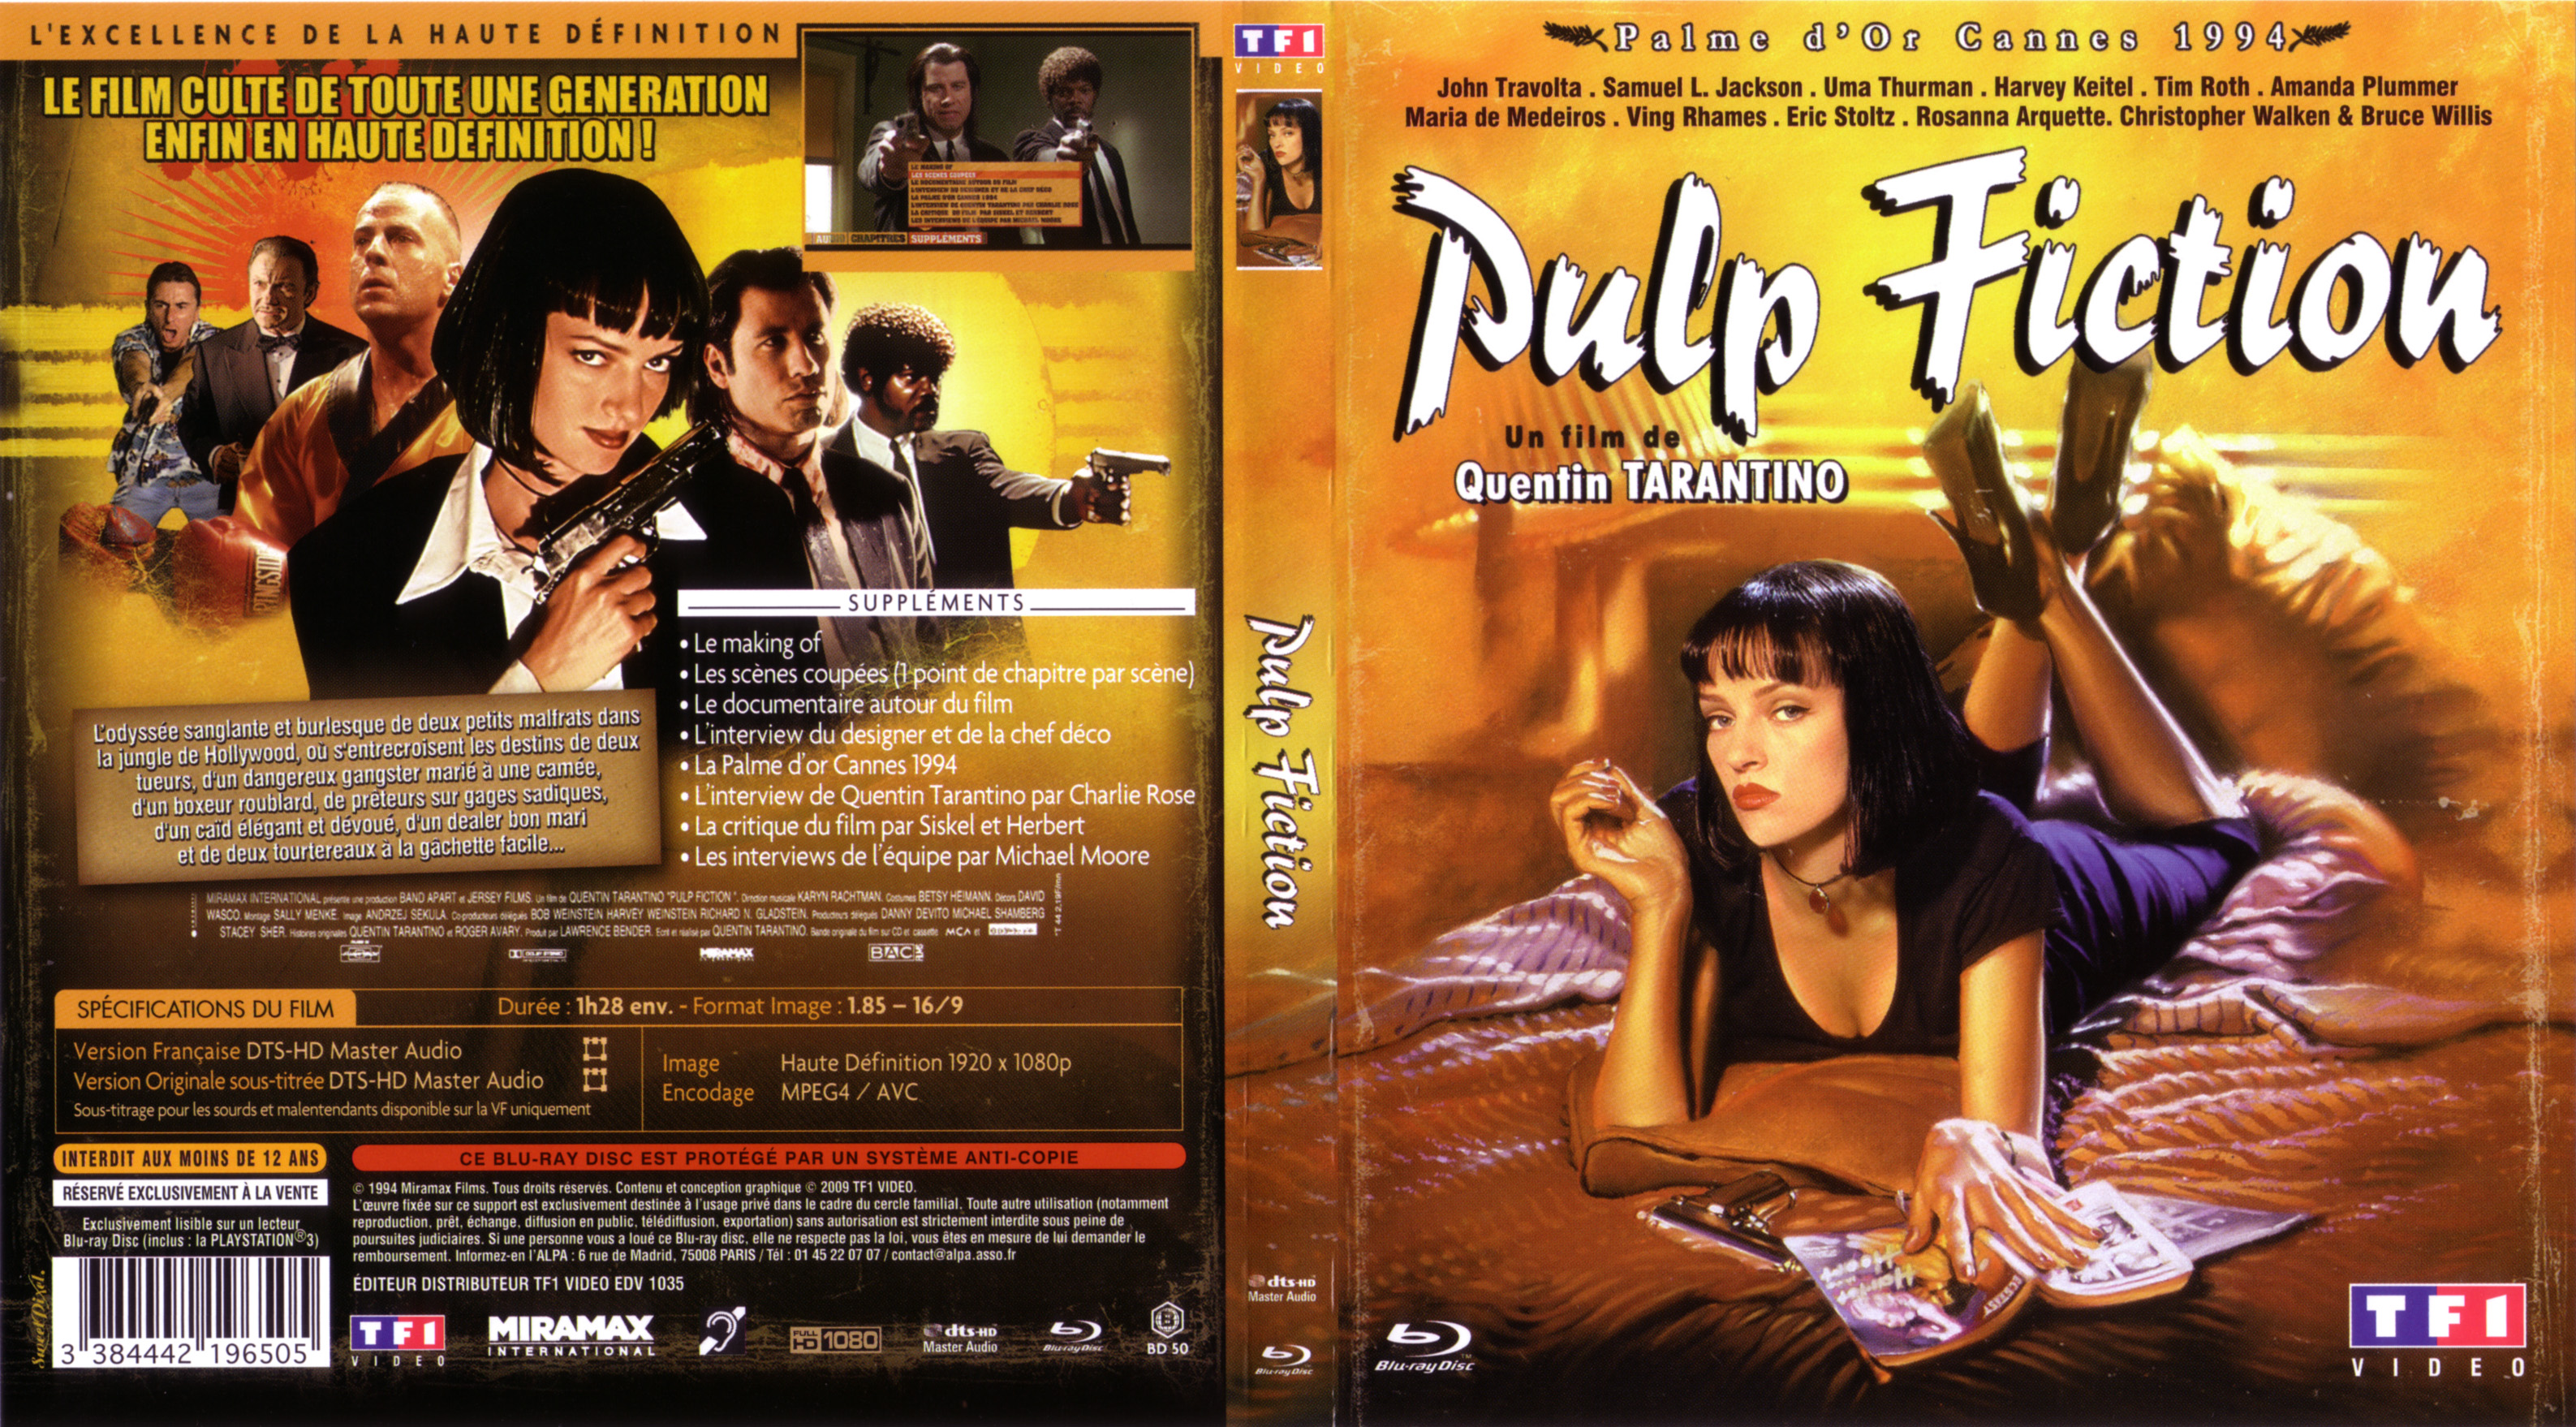 Jaquette DVD Pulp fiction (BLU-RAY)